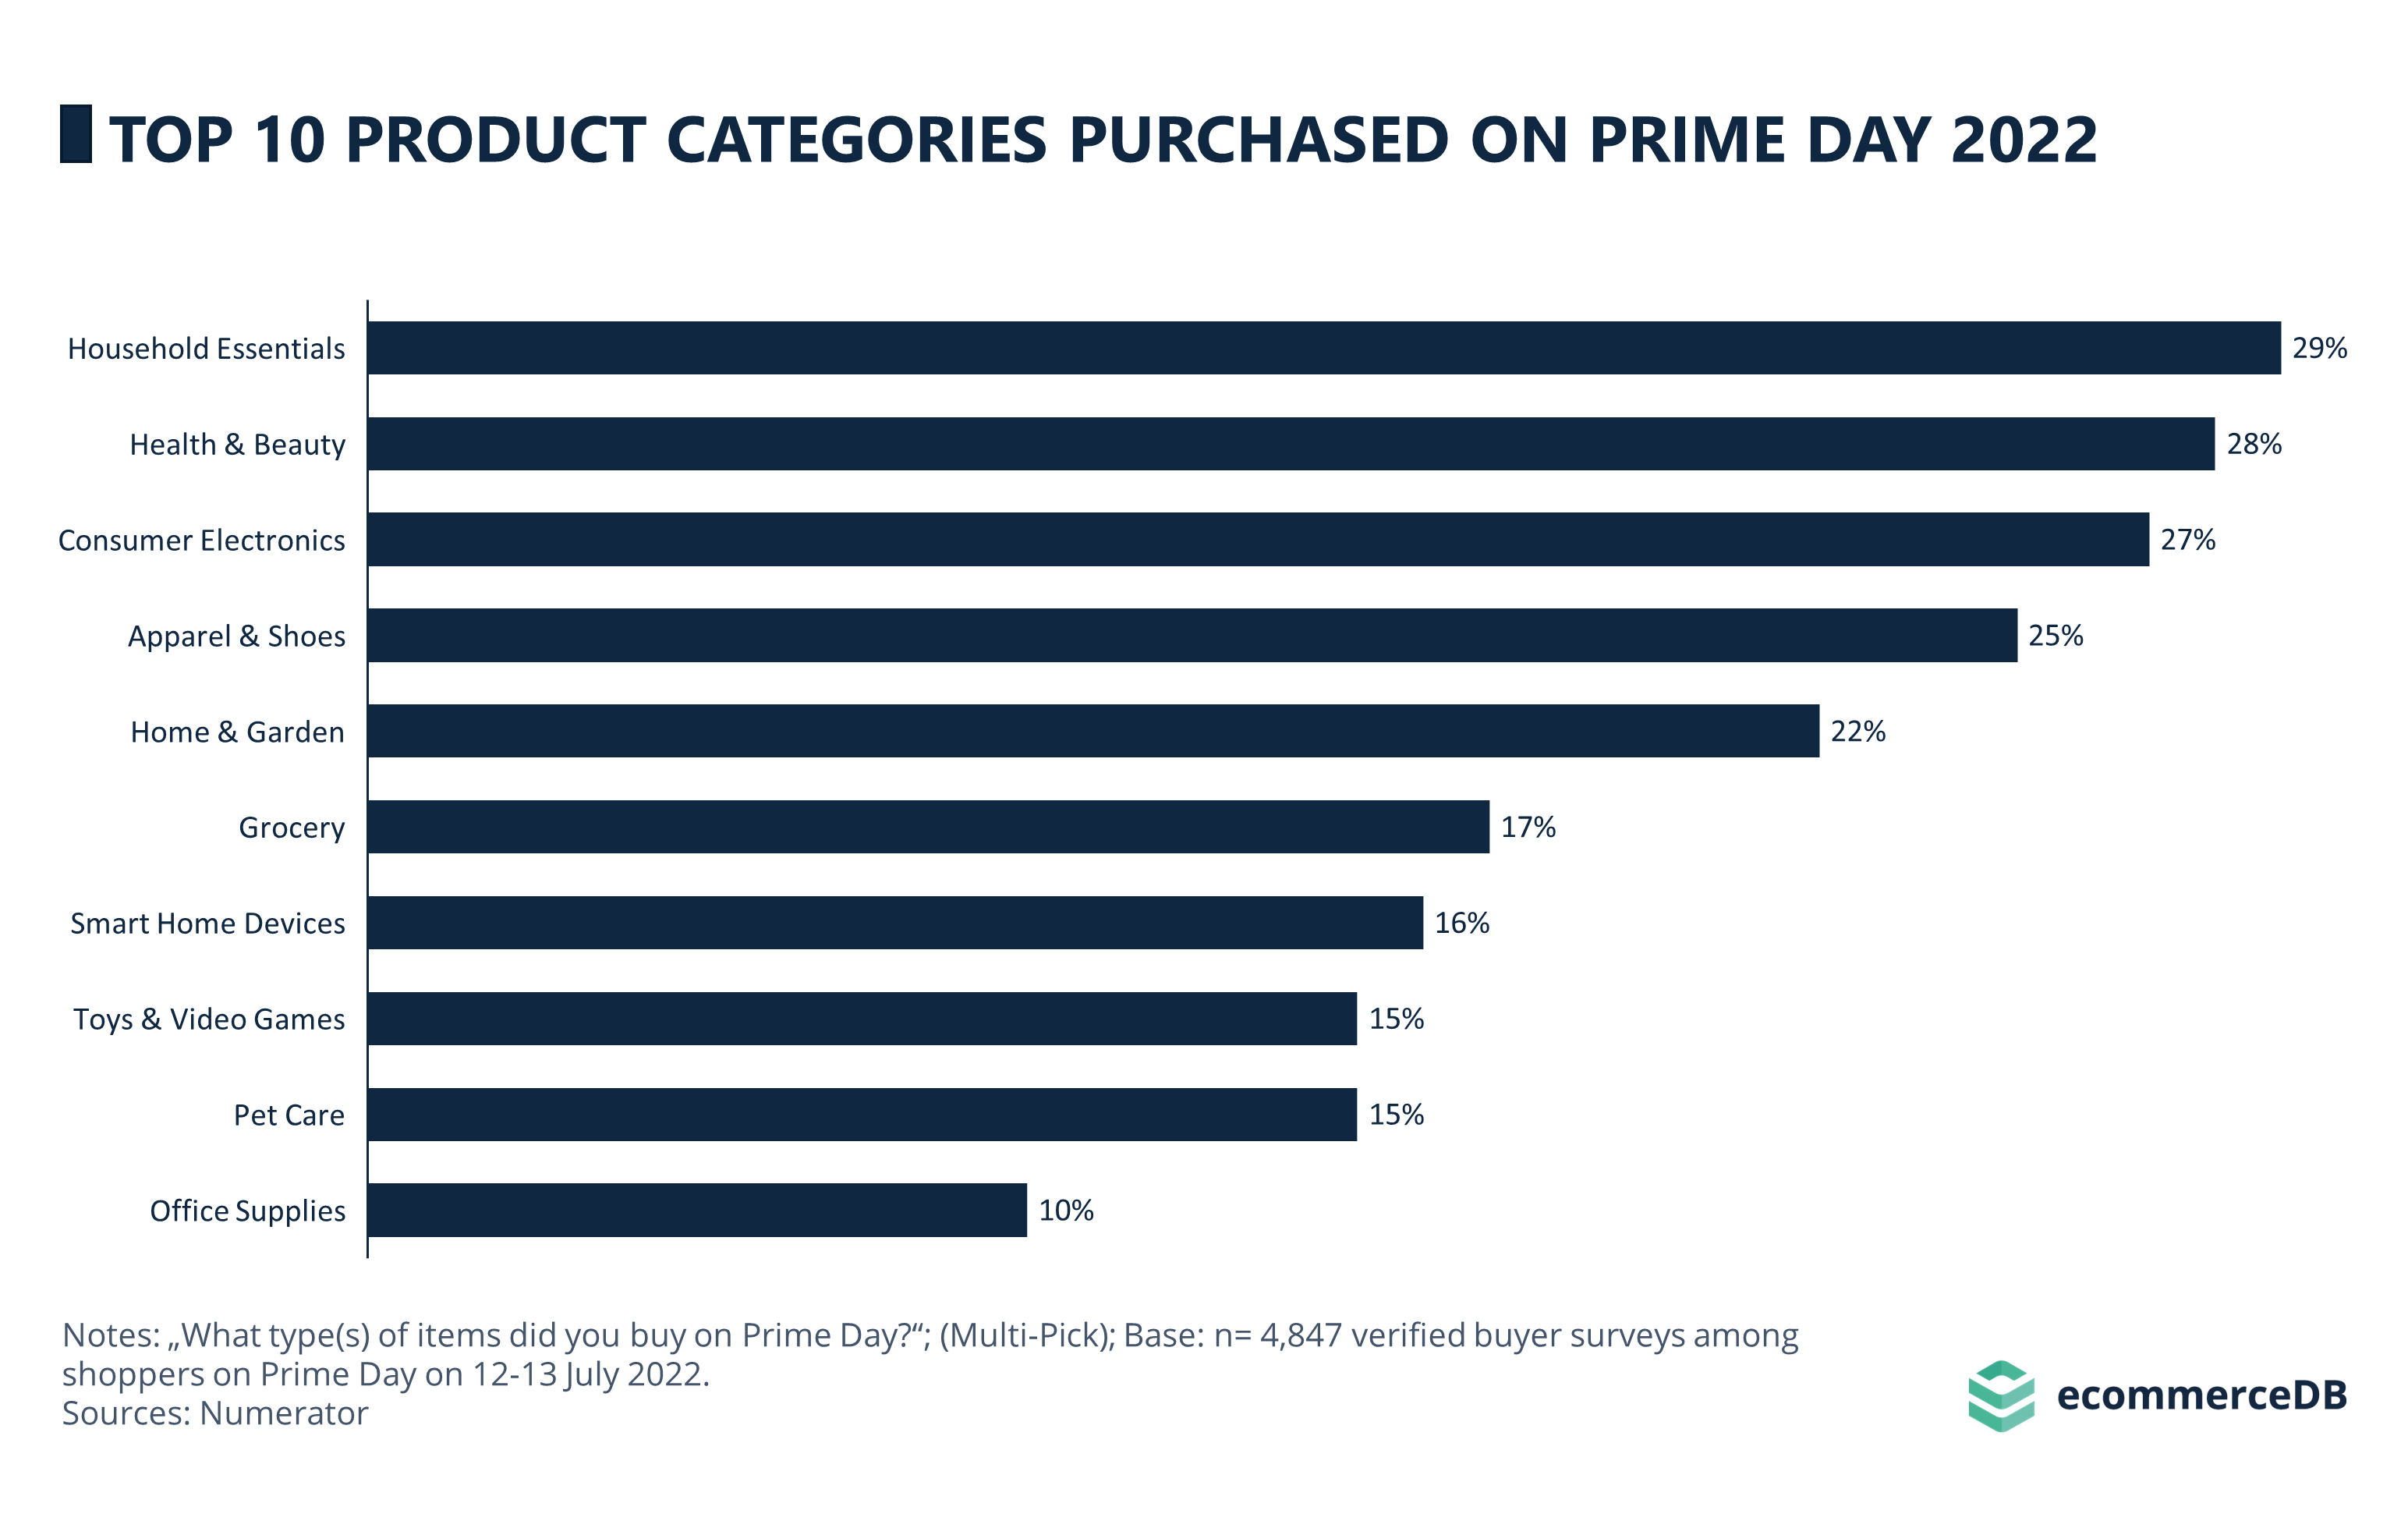 Top 10 Product Categories Bought on Prime Day 2022